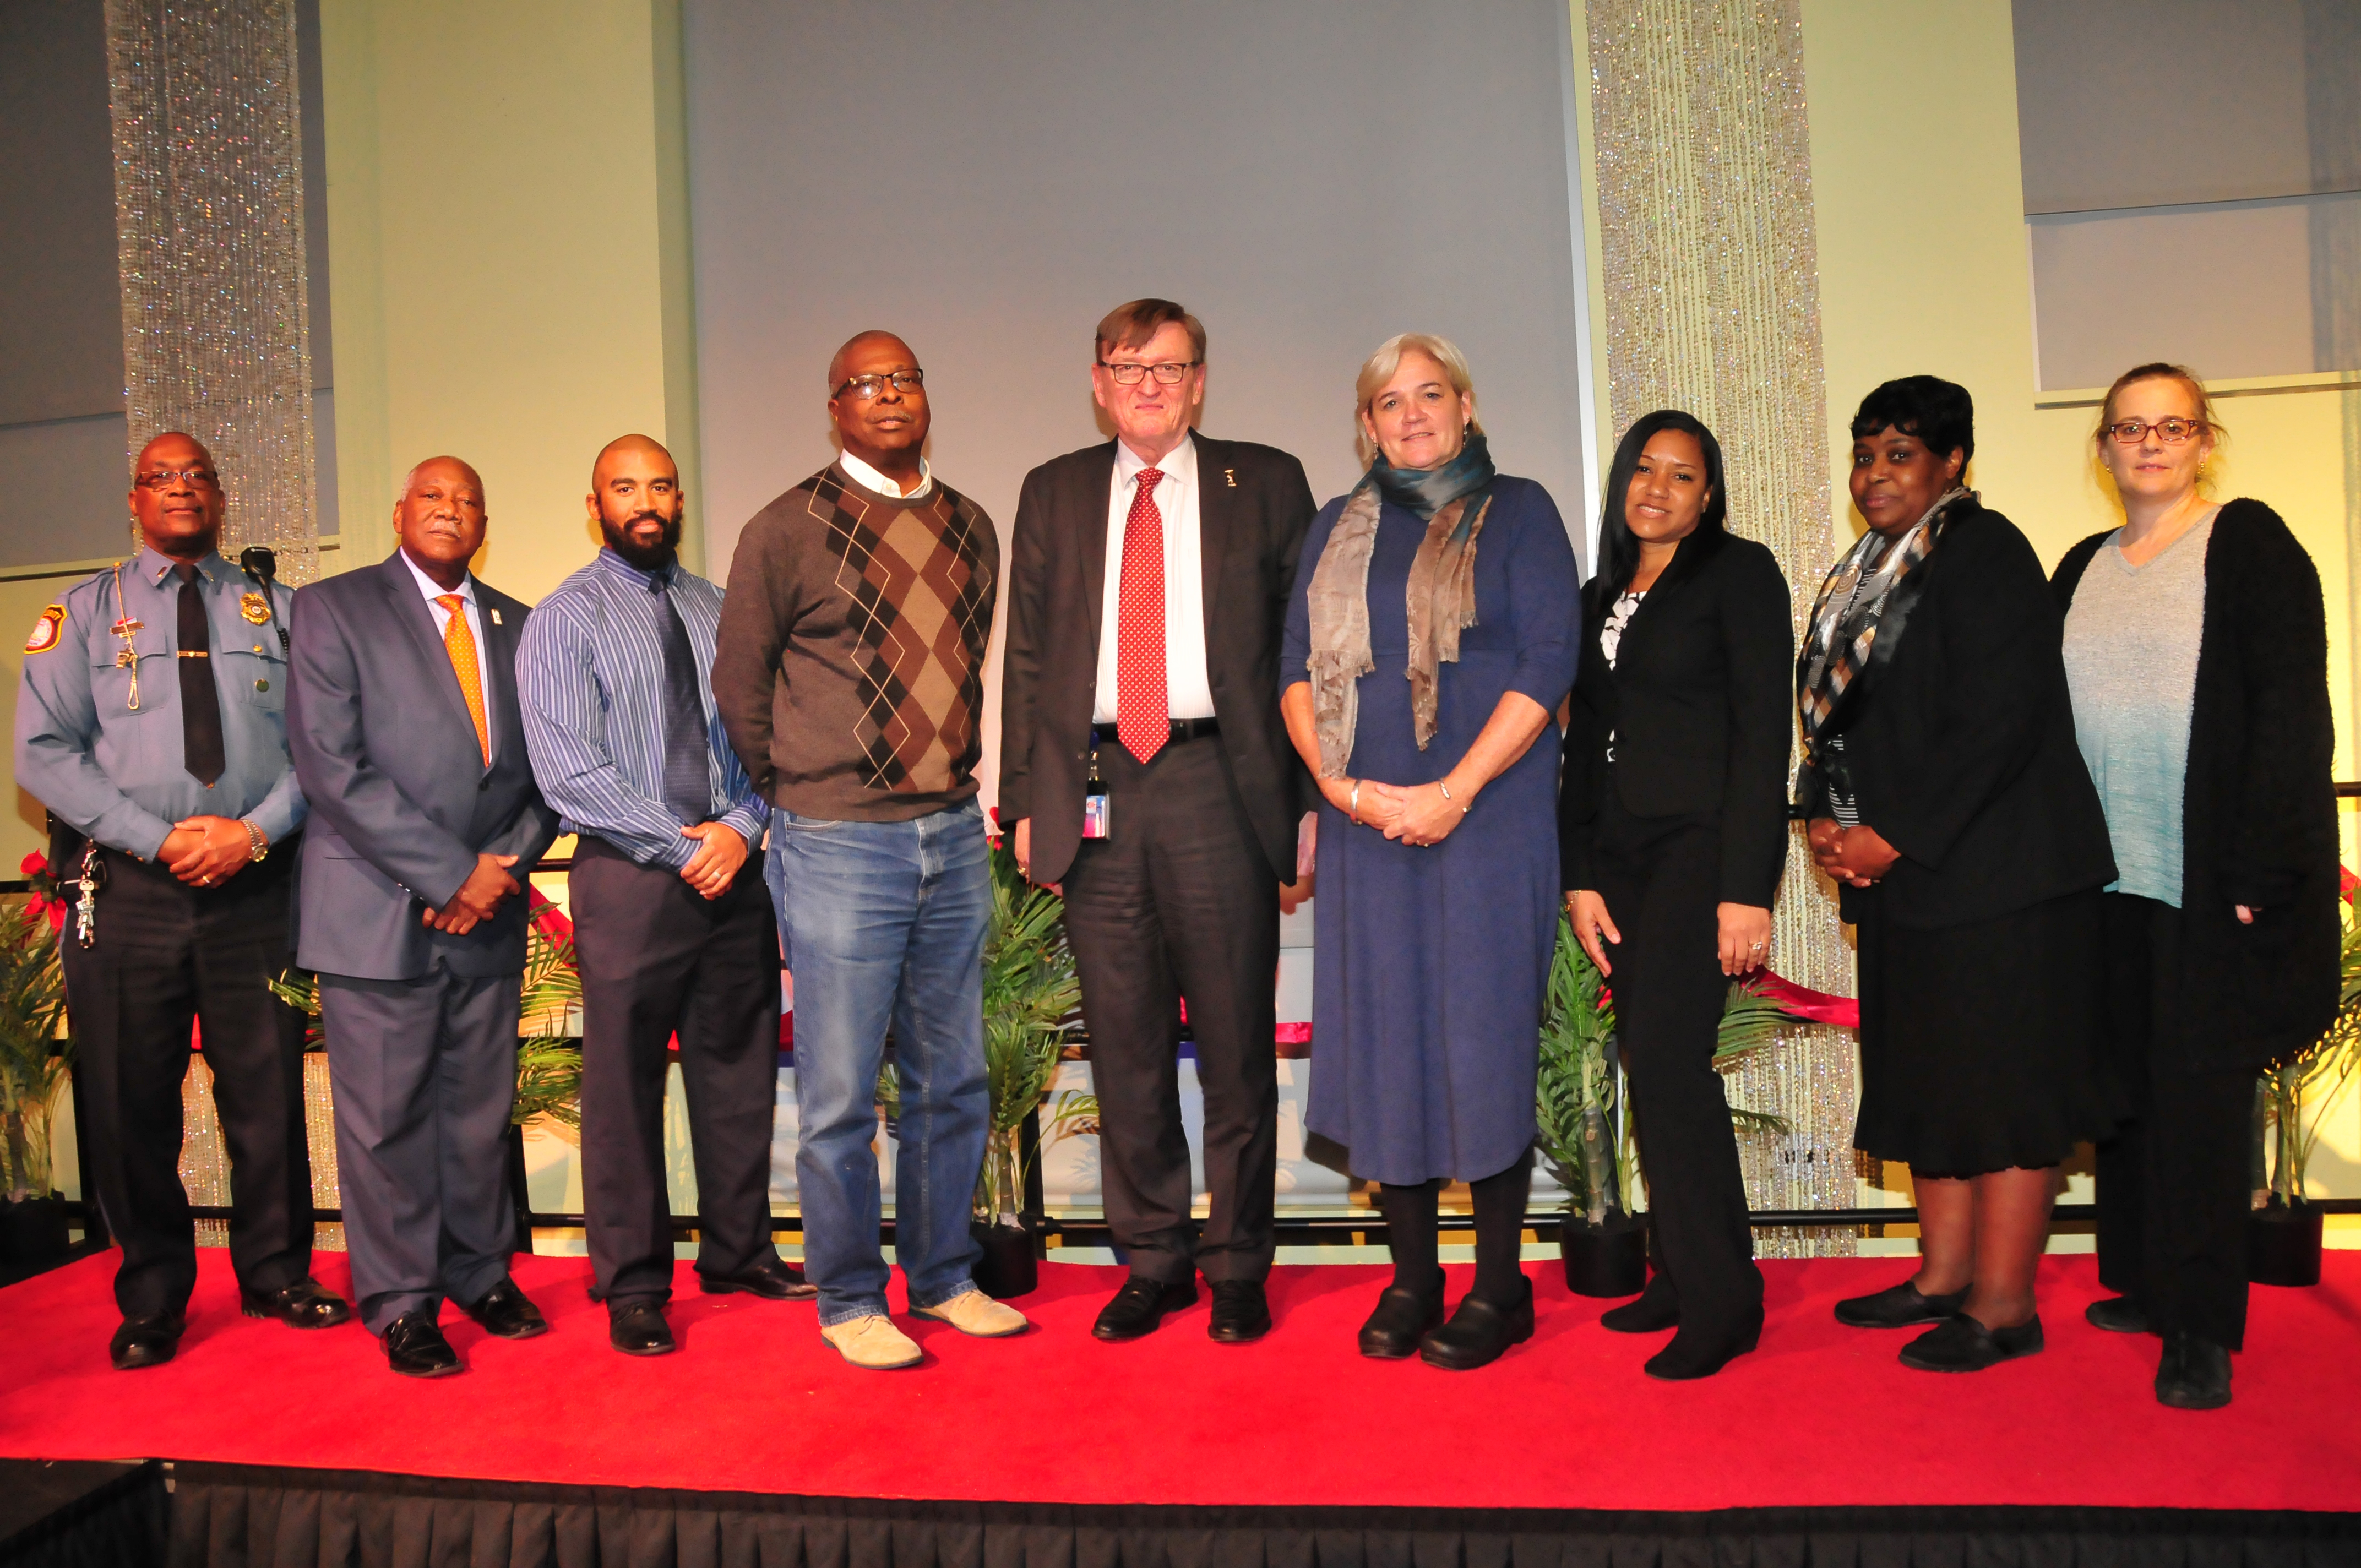 Delaware State University’s 2017 Vice Presidents Choice Award recipients: (l-r) Lt. Russell Smith, Bryant T. Bell, Joel Welsh, Dennis Jones, Dr. Bradley Skelcher, Dr. Alexa Silver, Jadeen Notice, Henrietta Savage and Crystal Canon. 